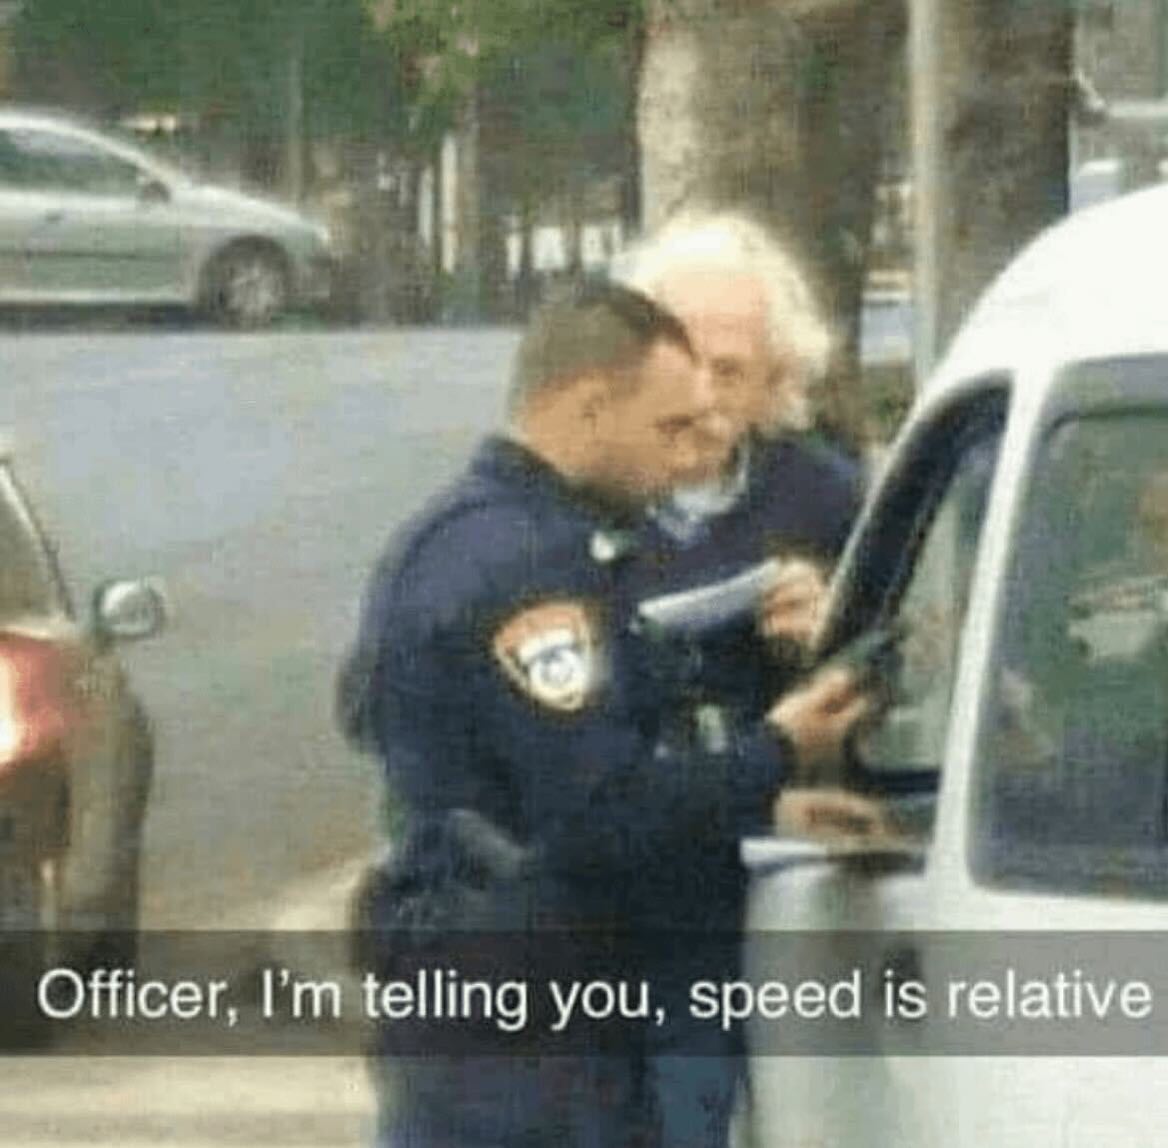 Officer, I’m telling you, speed is relative and time is an illusion